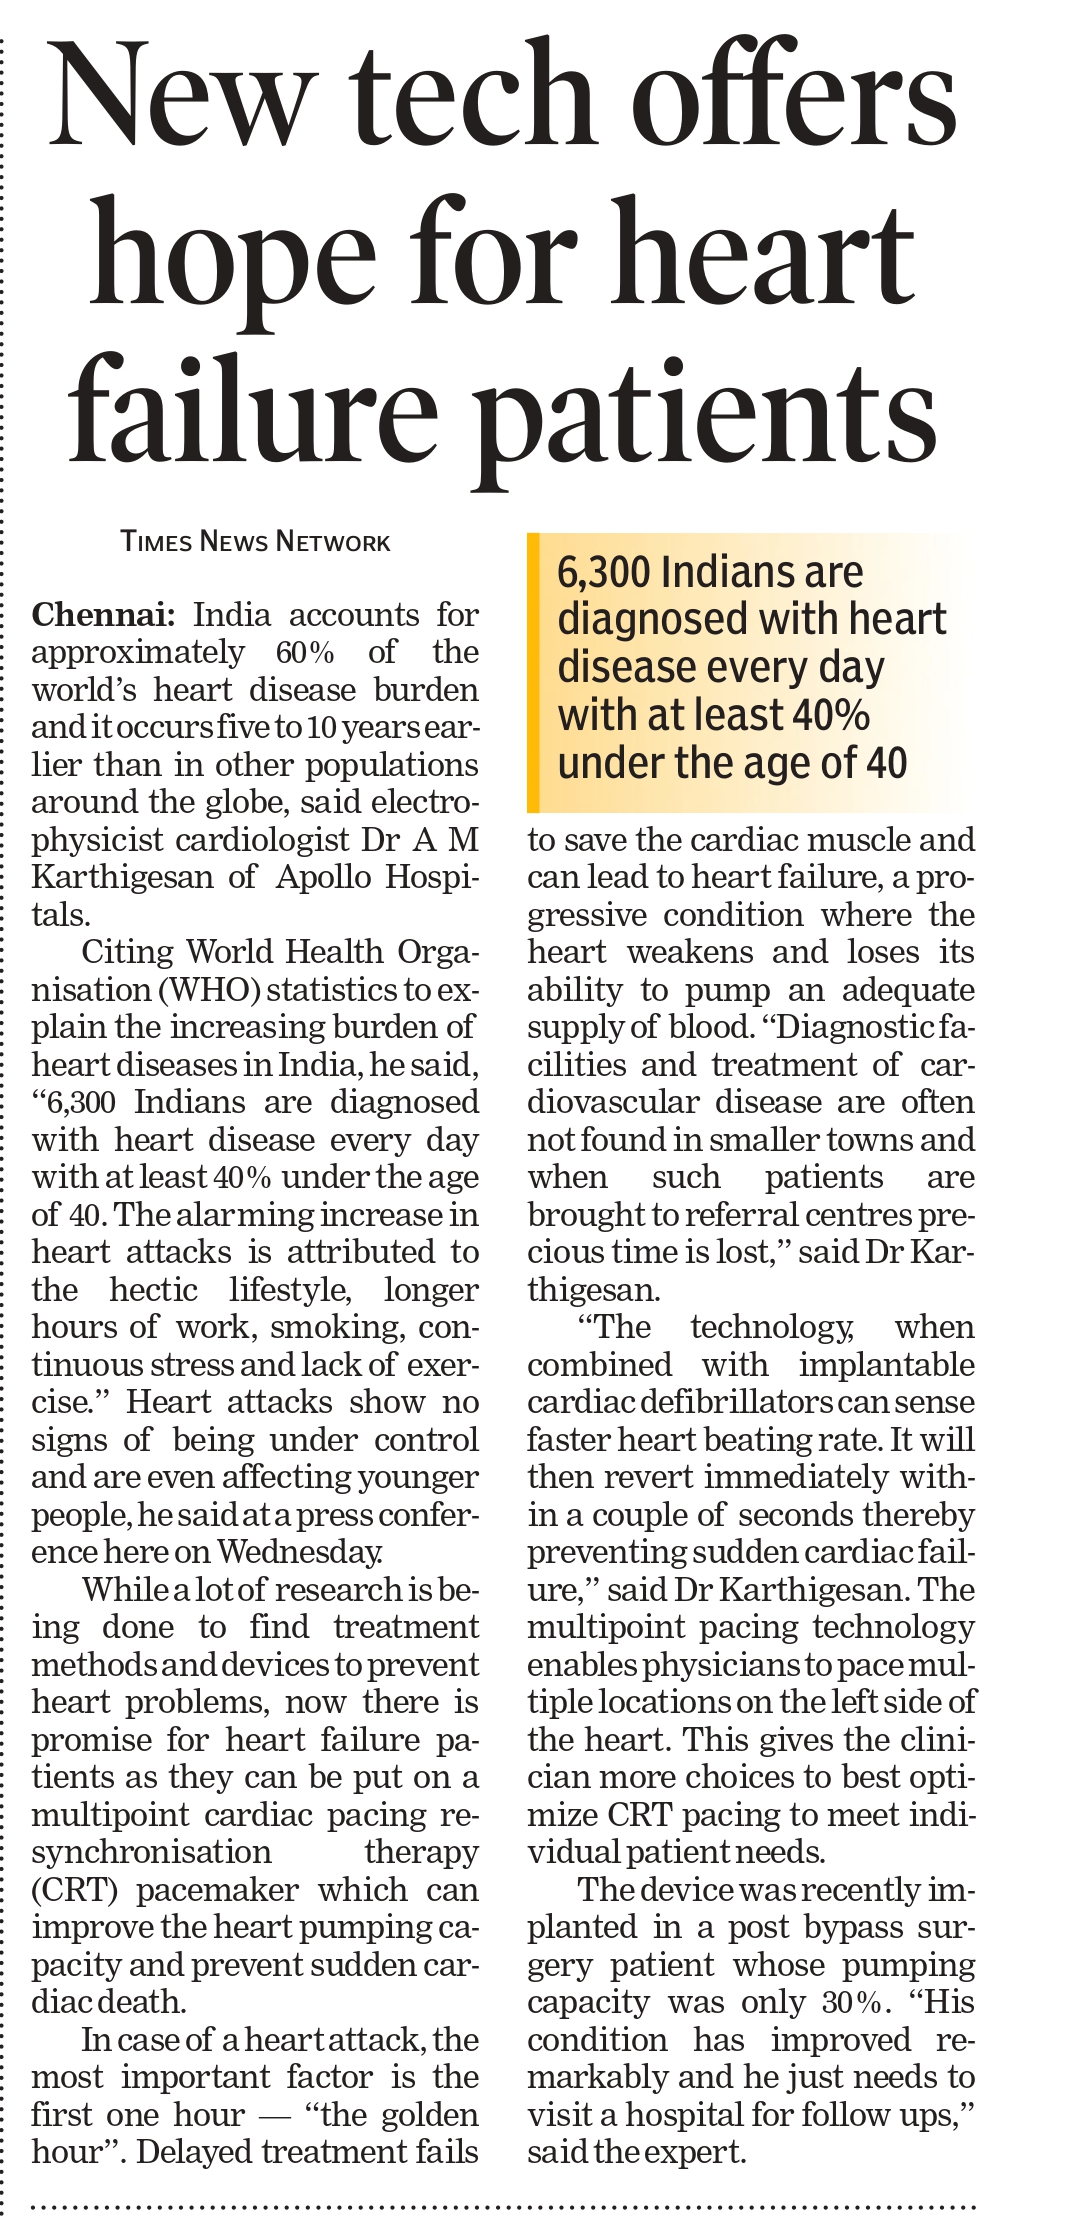 Image of a news article about technology for heart failure by Dr. Karthigesan A.M.